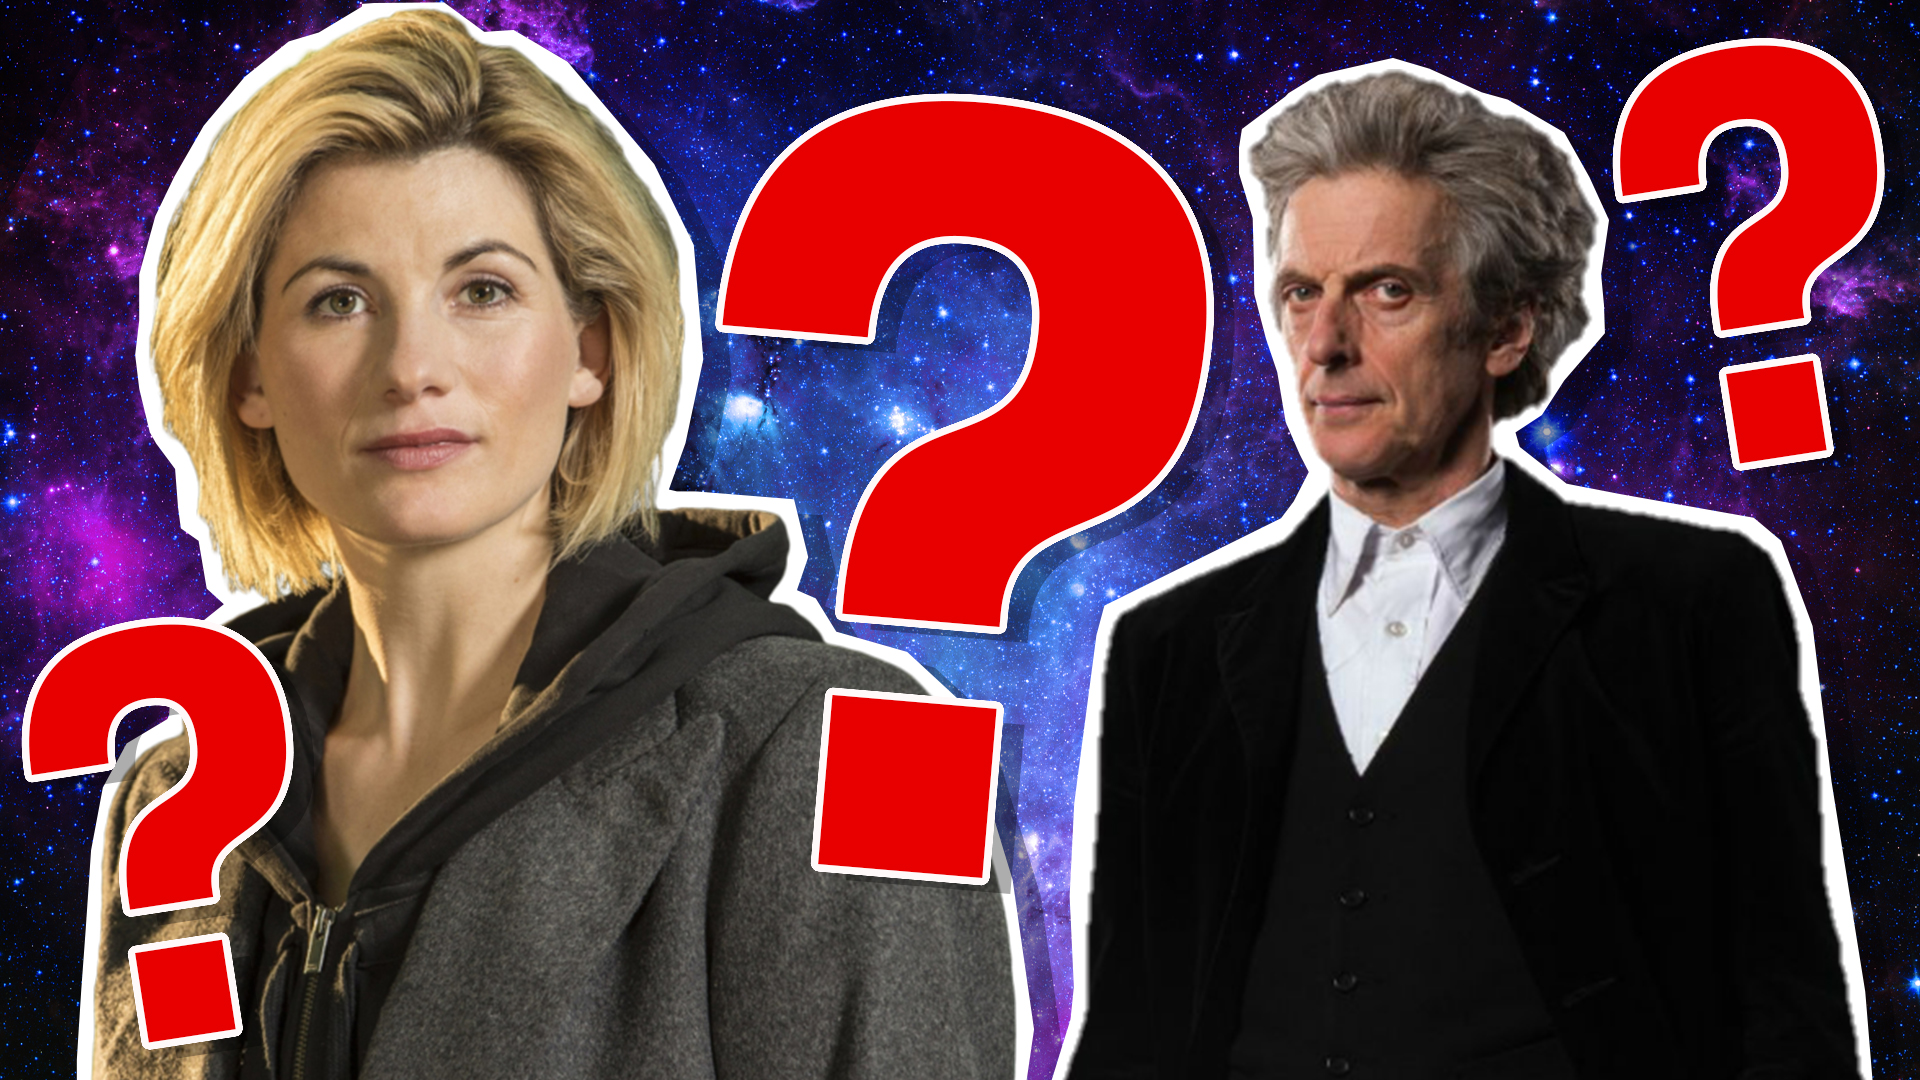 Doctor Who personality quiz